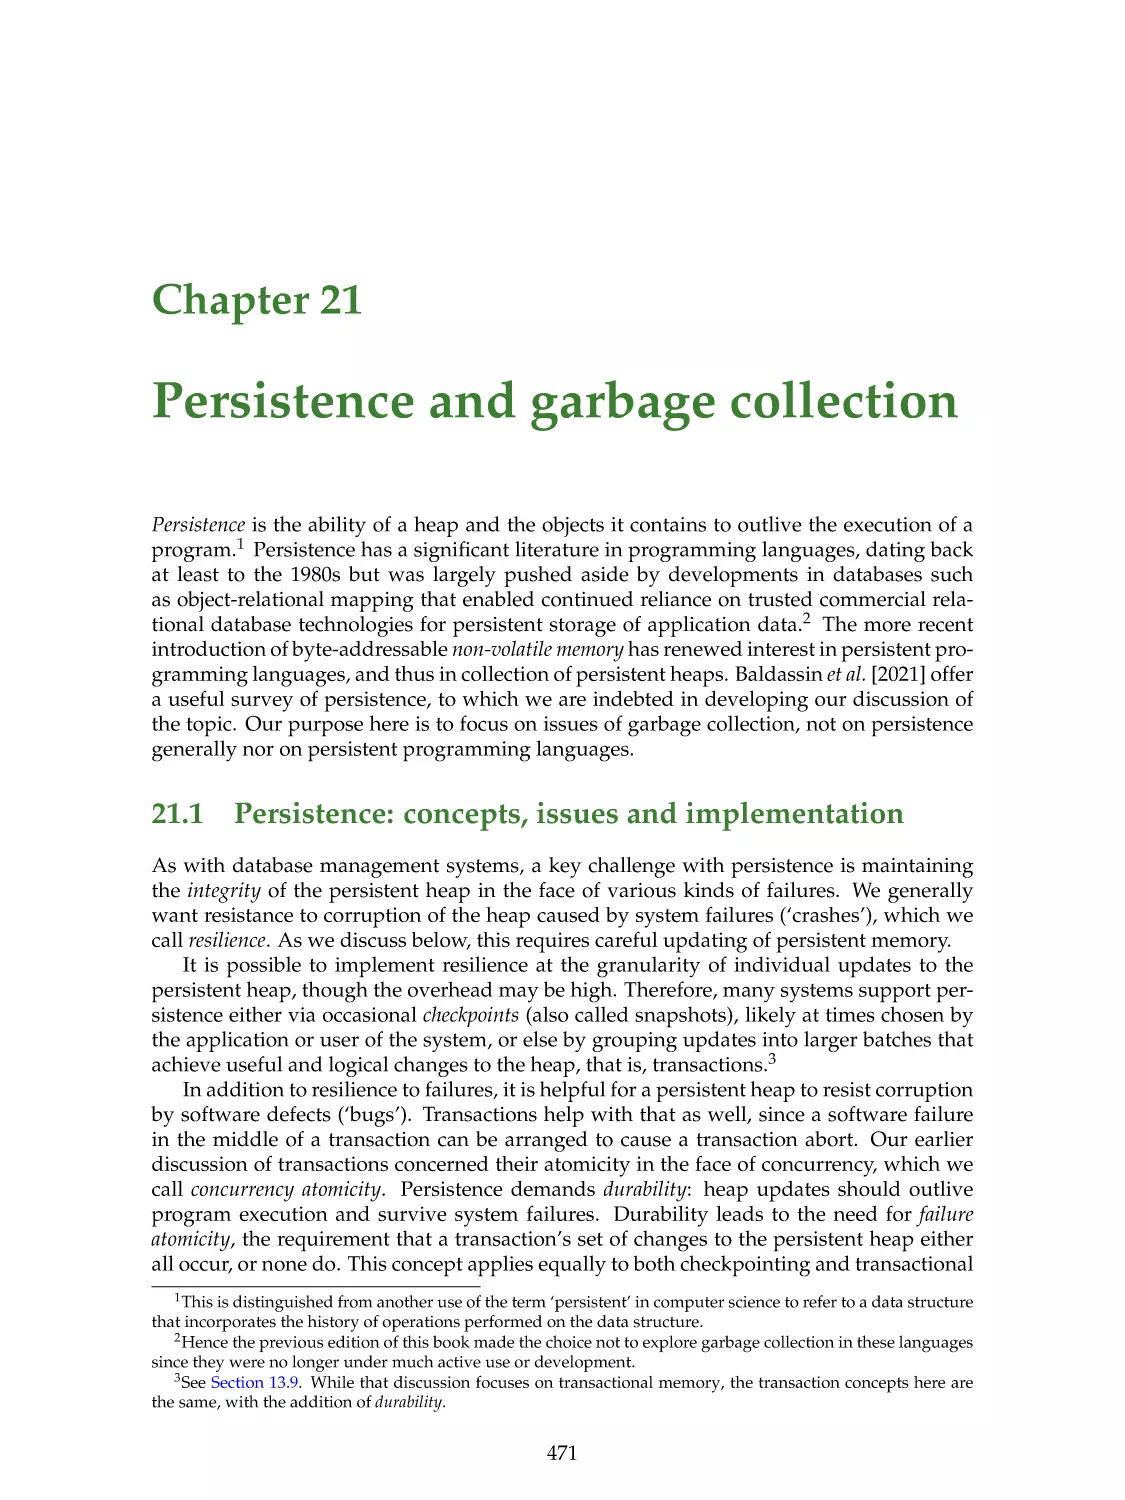 21. Persistence and garbage collection
21.1. Persistence